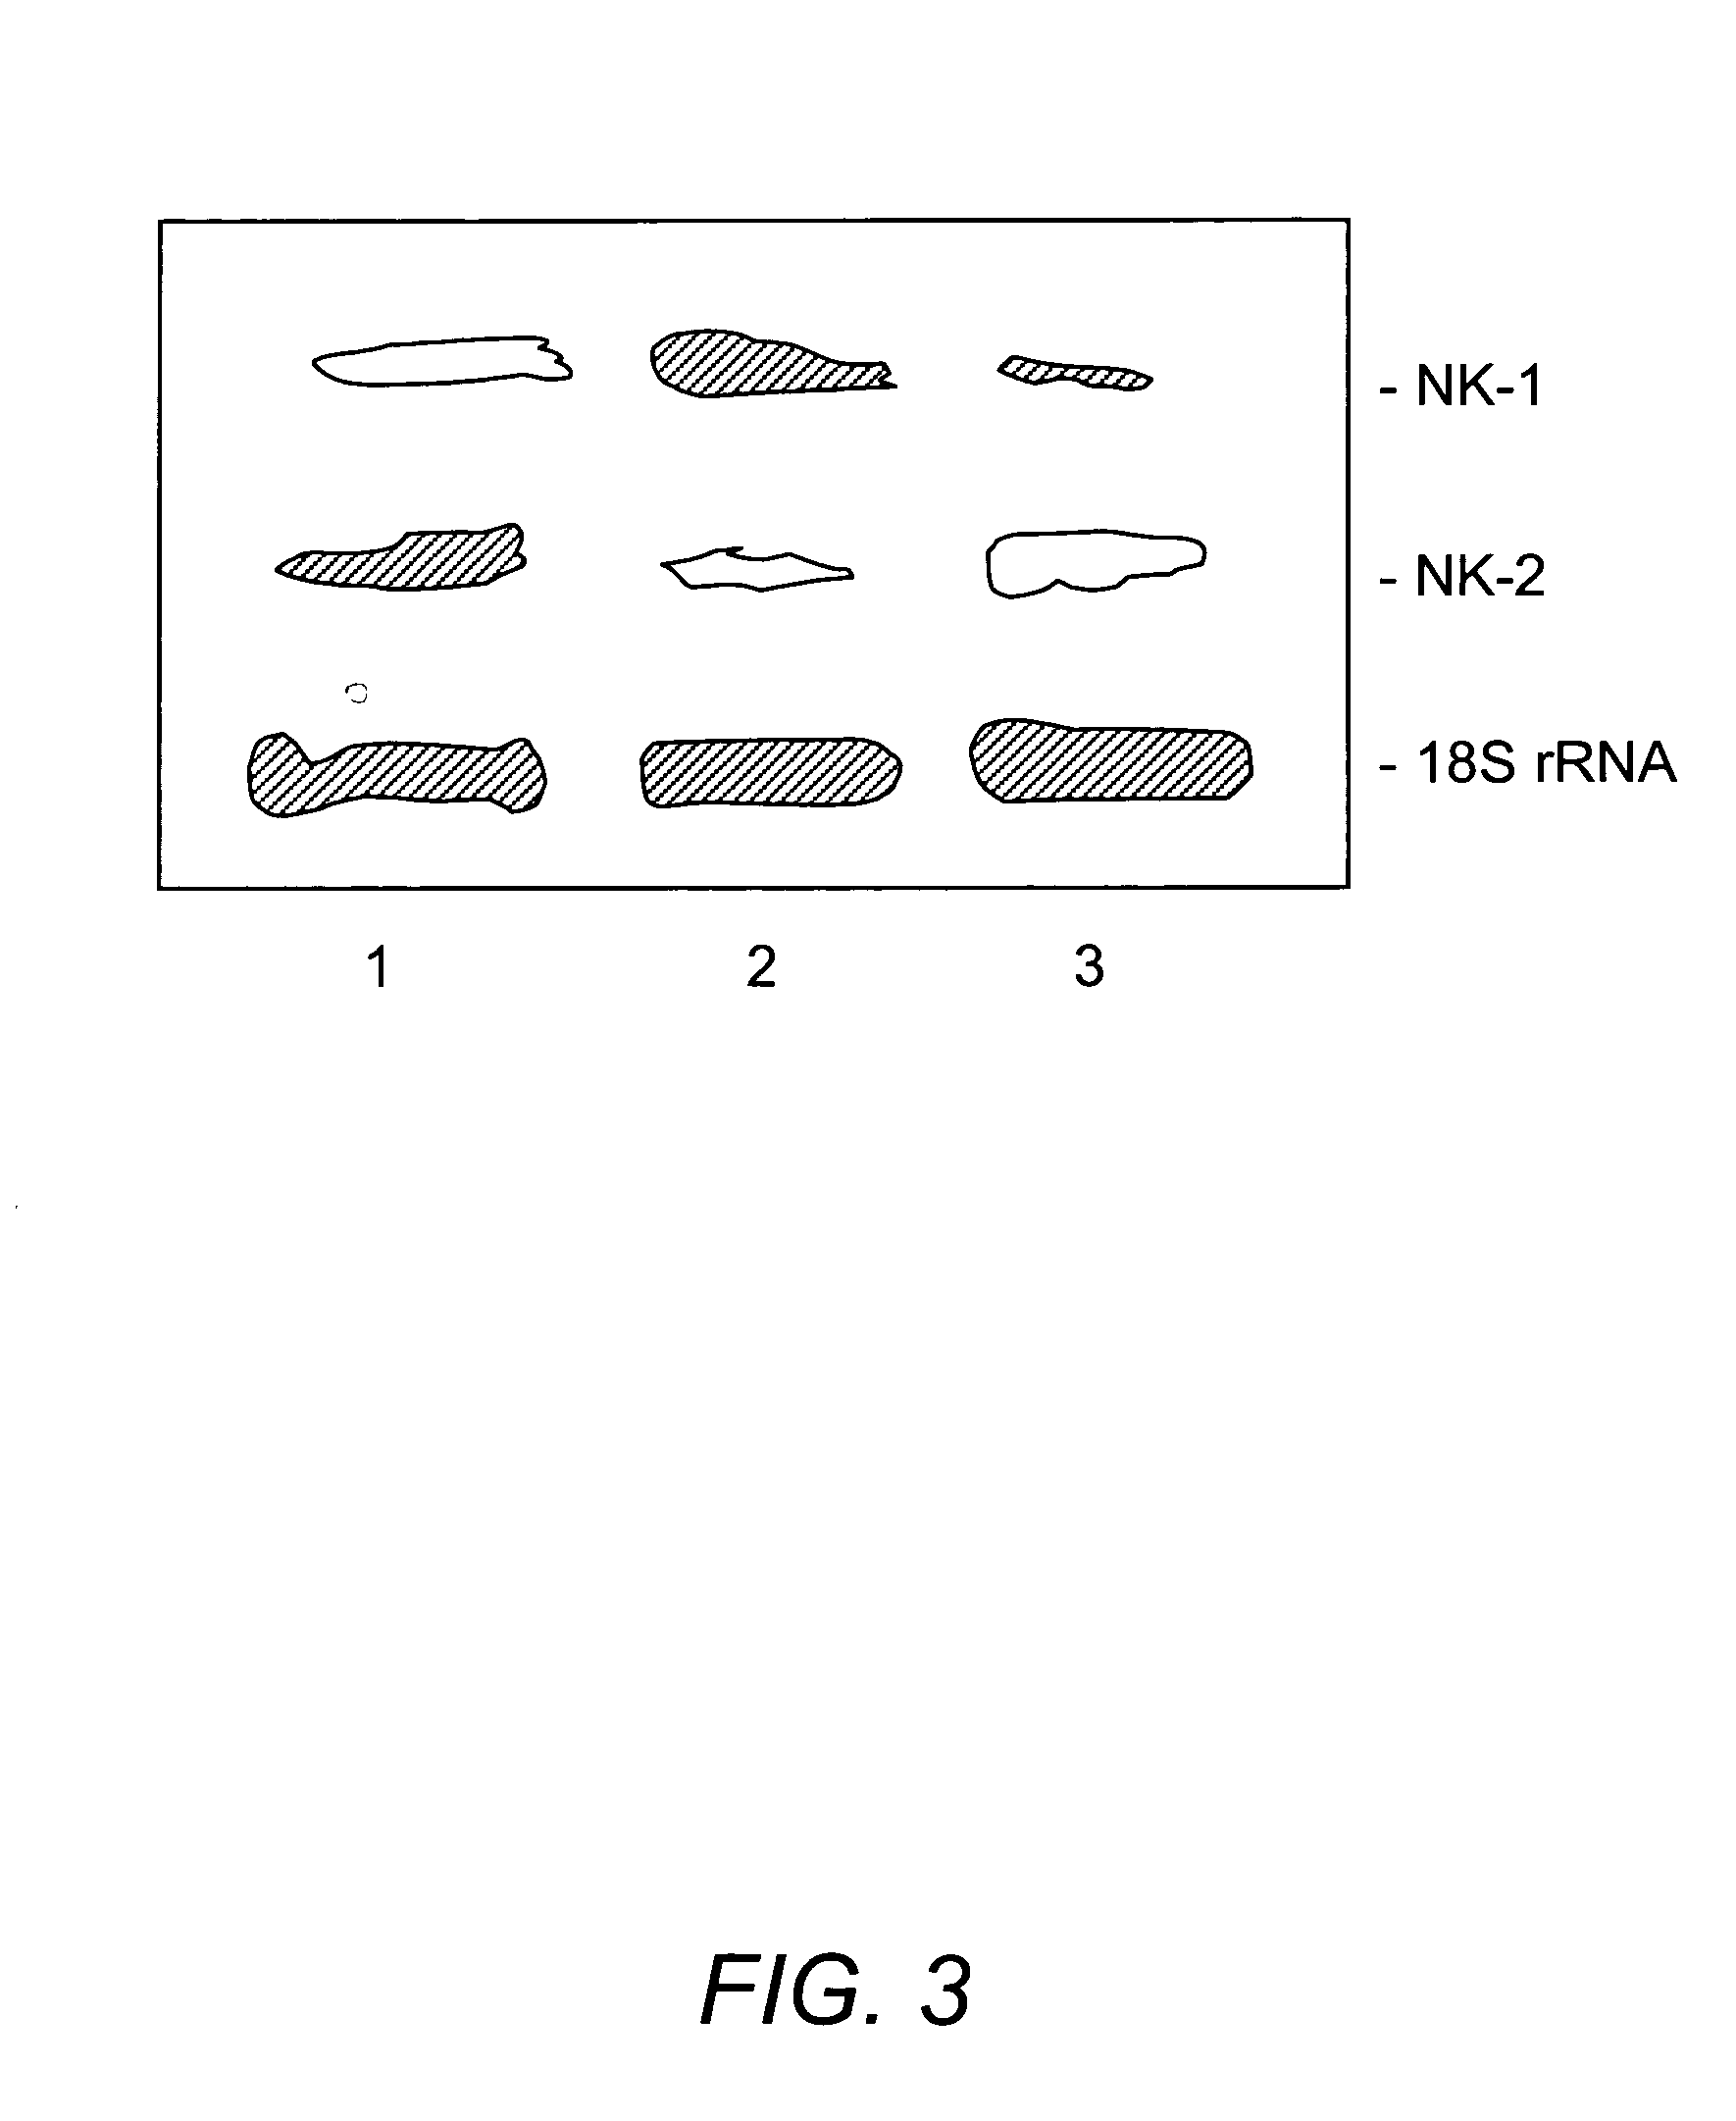 Amino terminal substance P compositions and methods for using the same